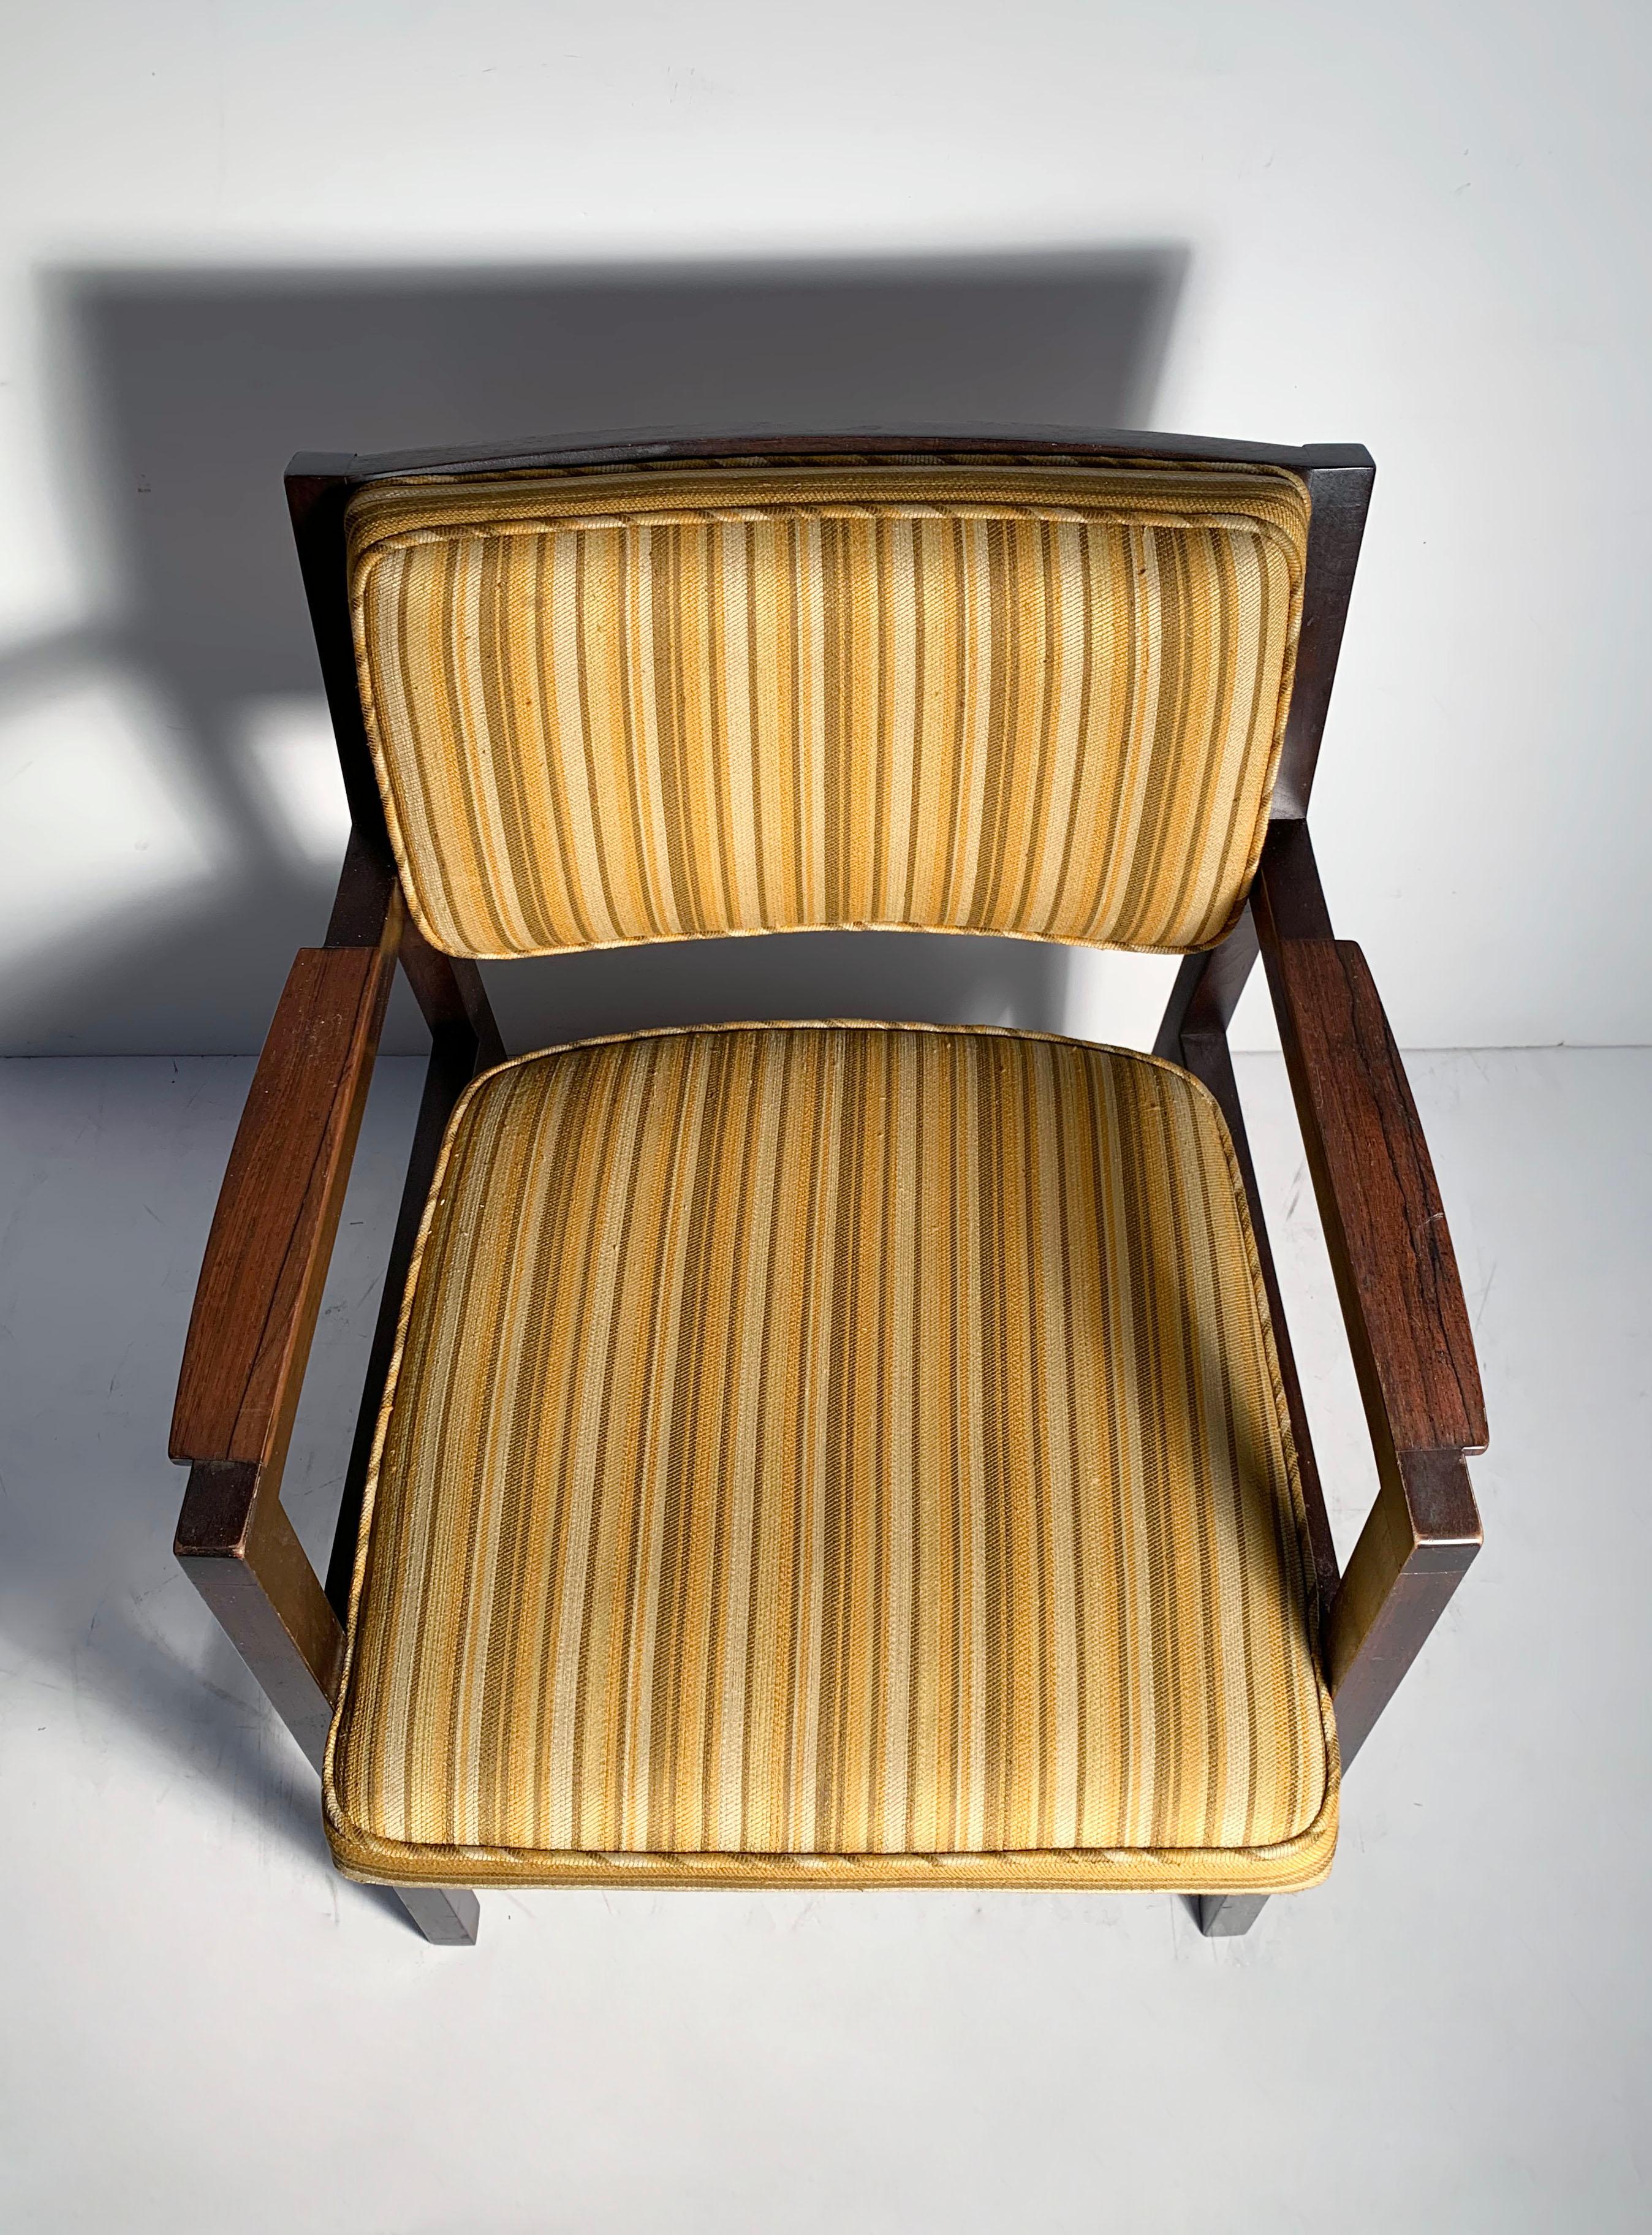 American Architectural Designer Desk Chair By Edward Wormley for Dunbar For Sale